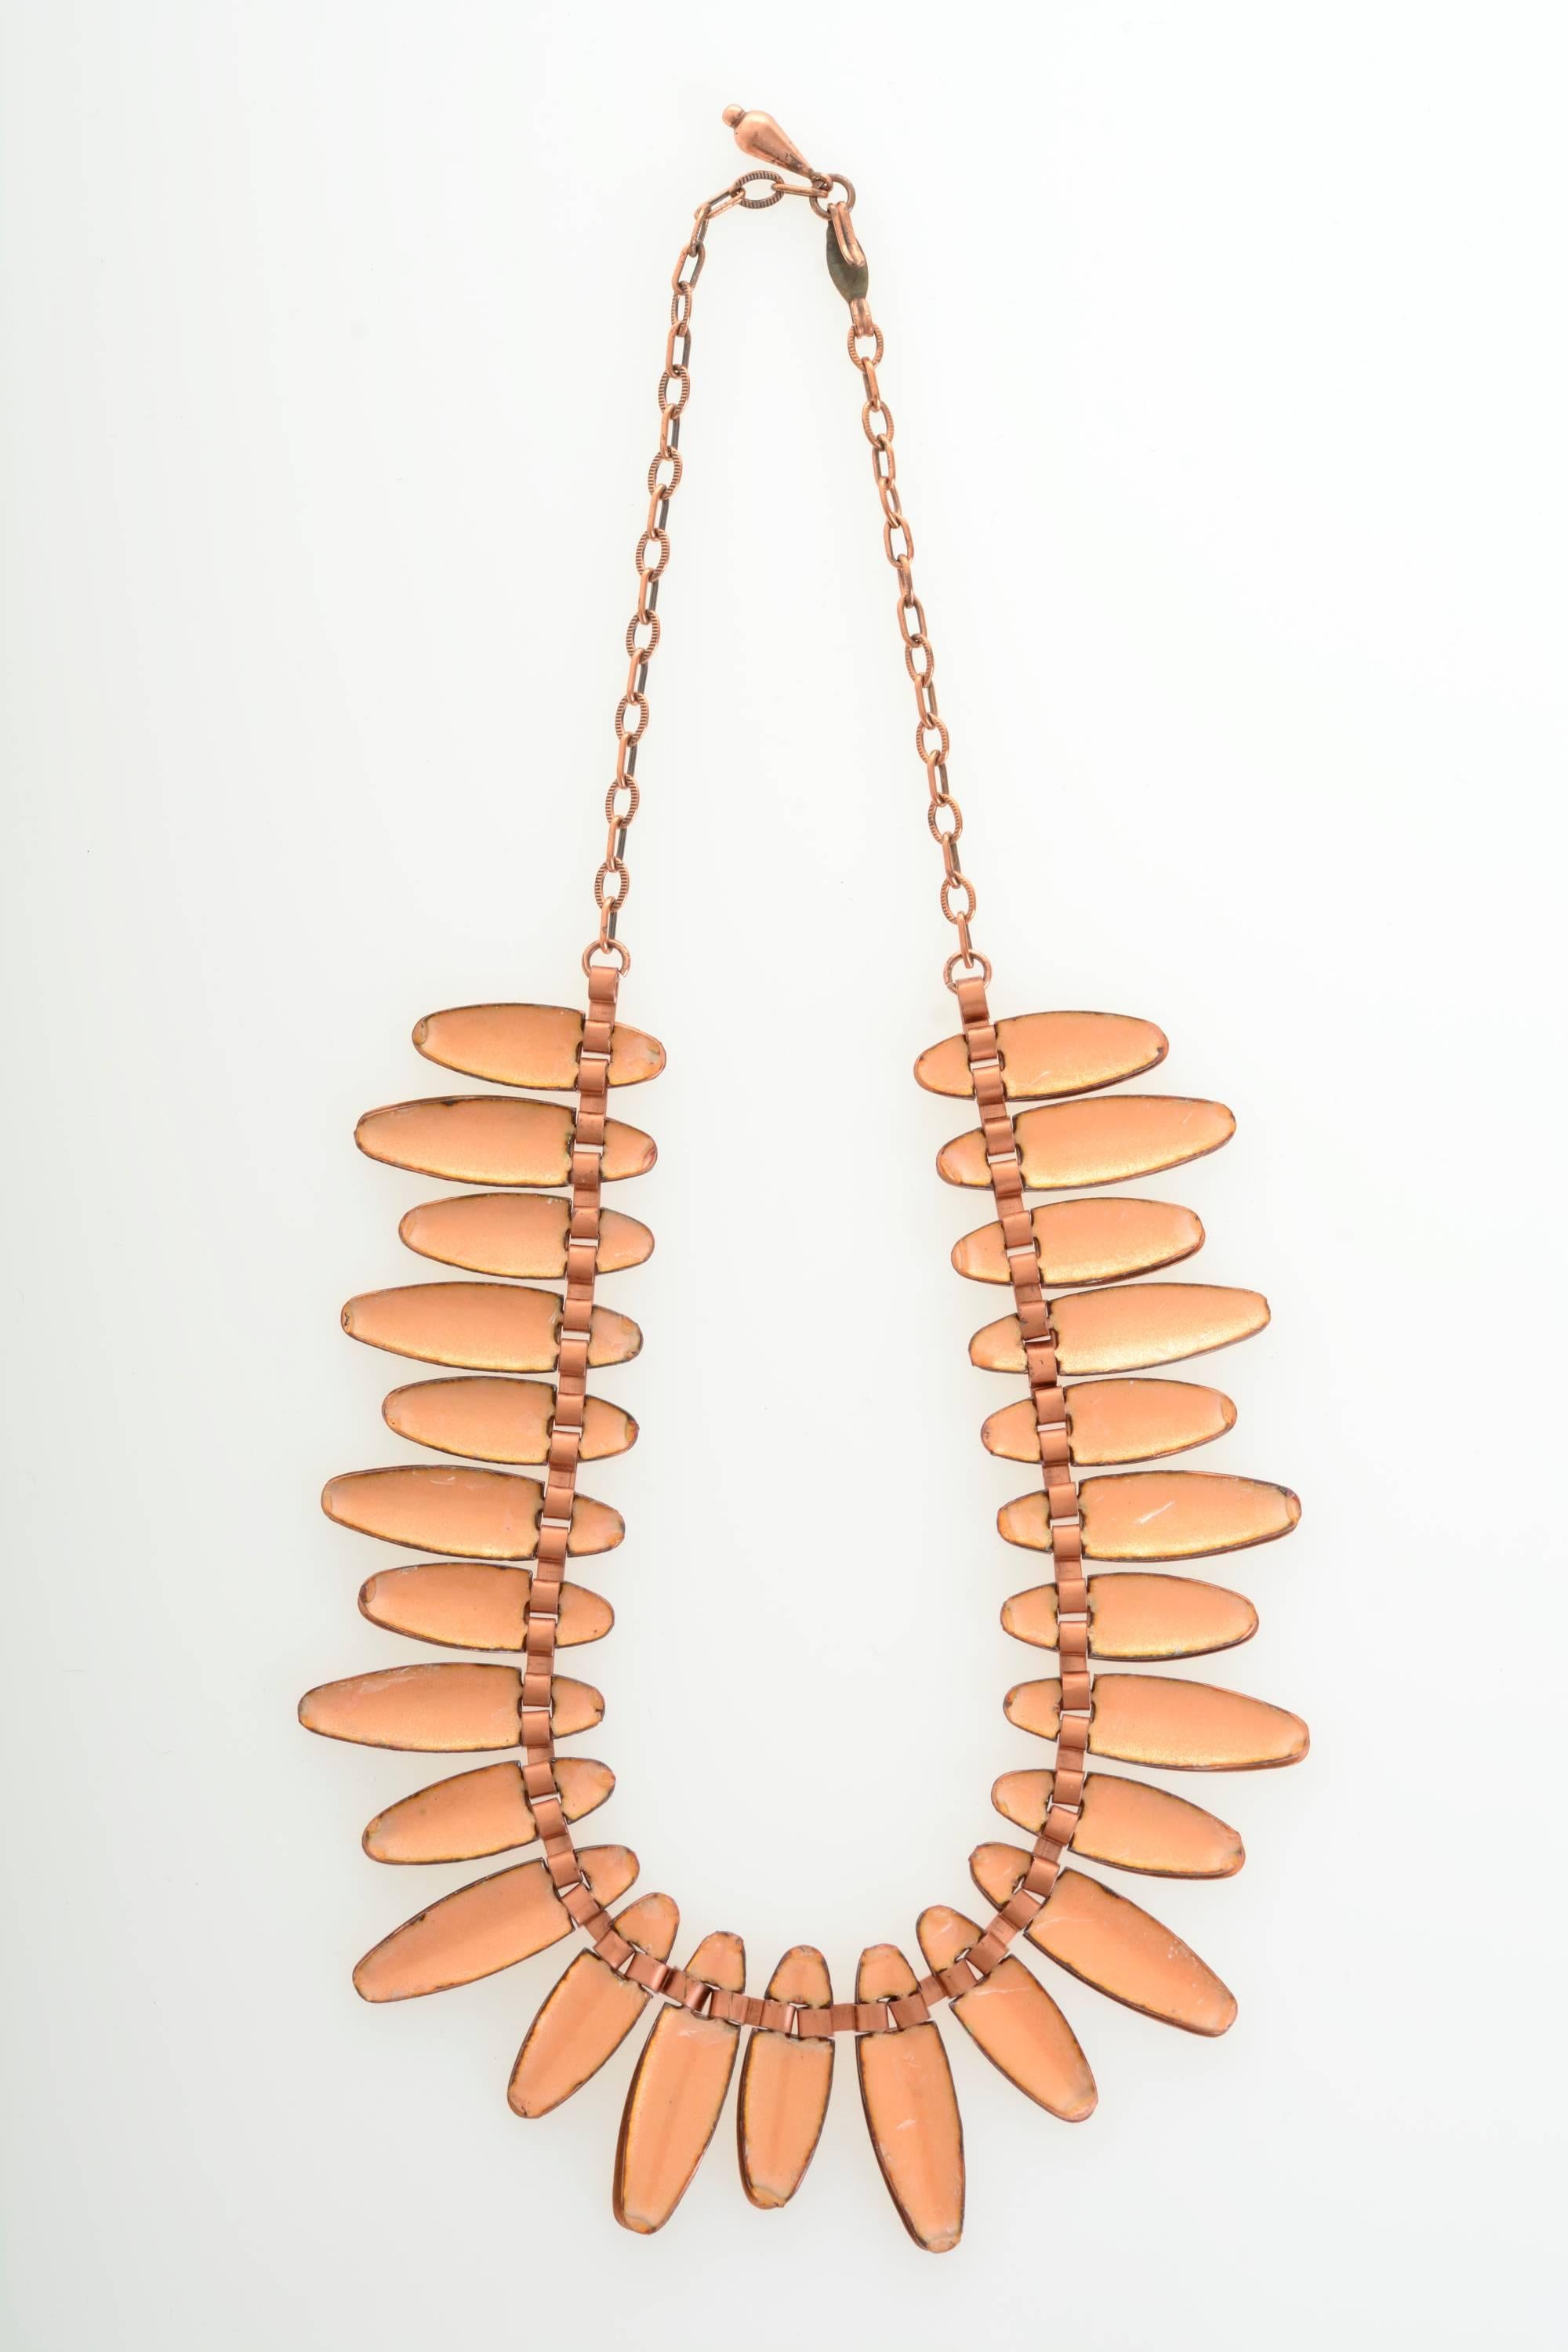 This gorgeous 1950s Matisse necklace is in copper with white lacquered details.
The length of the necklace can be adjusted with a hook clasp.  

Good vintage condition

Brand: Matisse

Measurements:
Length 18 inch
Width1,25 inch